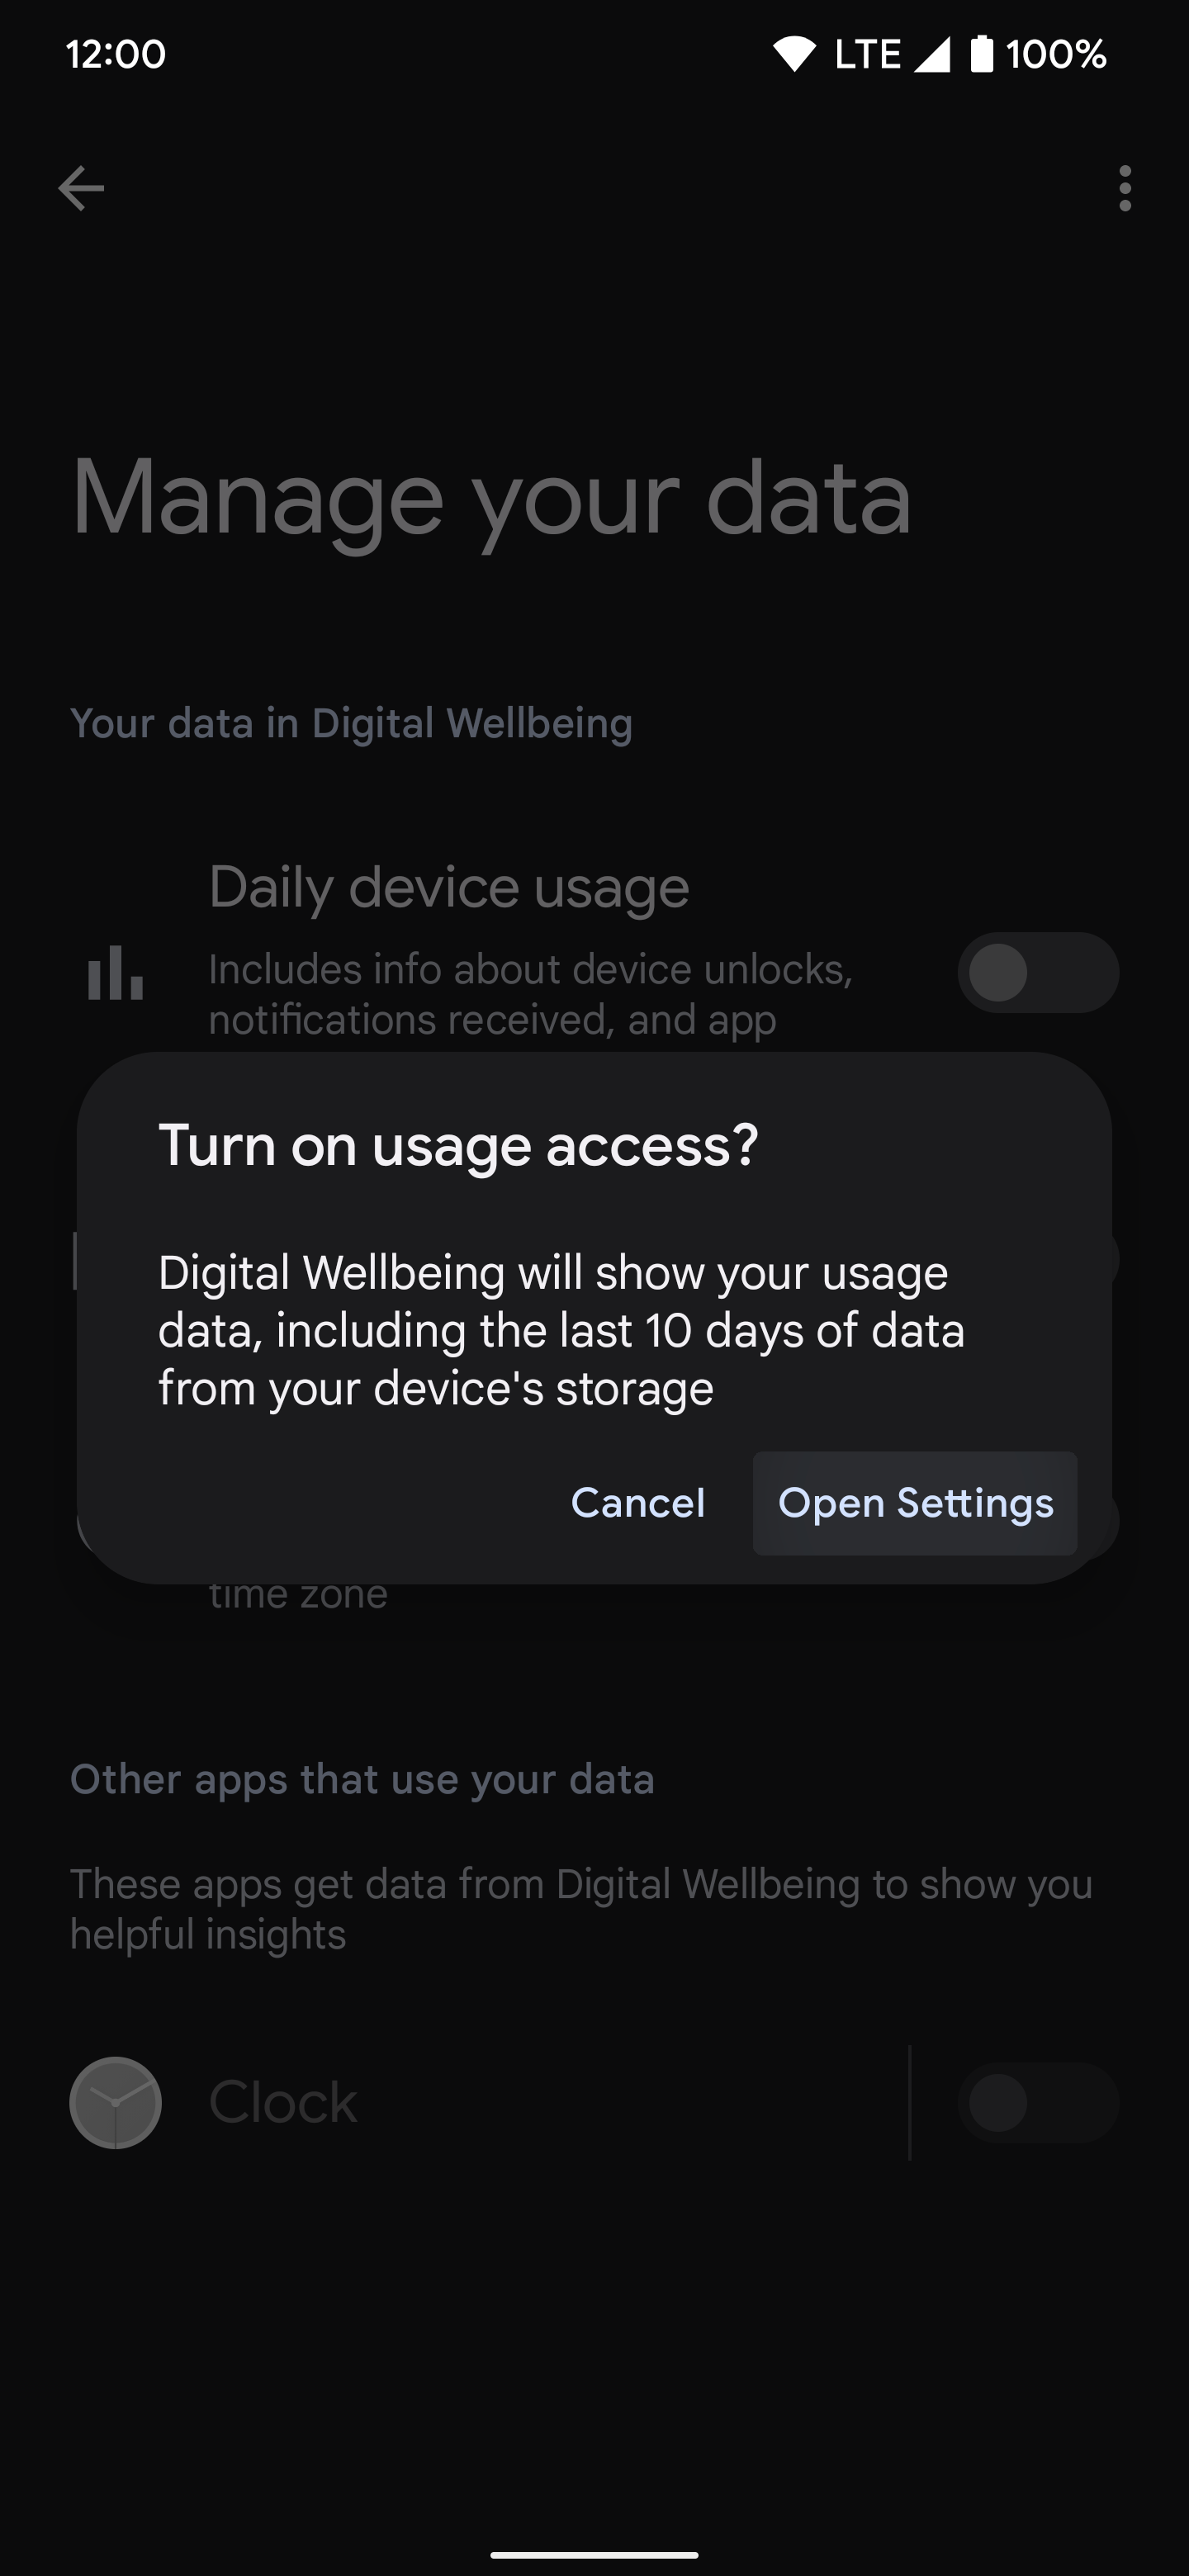 Screenshot shows the 'Turn on usage access?' pop up, with options to 'Cancel' or 'Open Settings'.